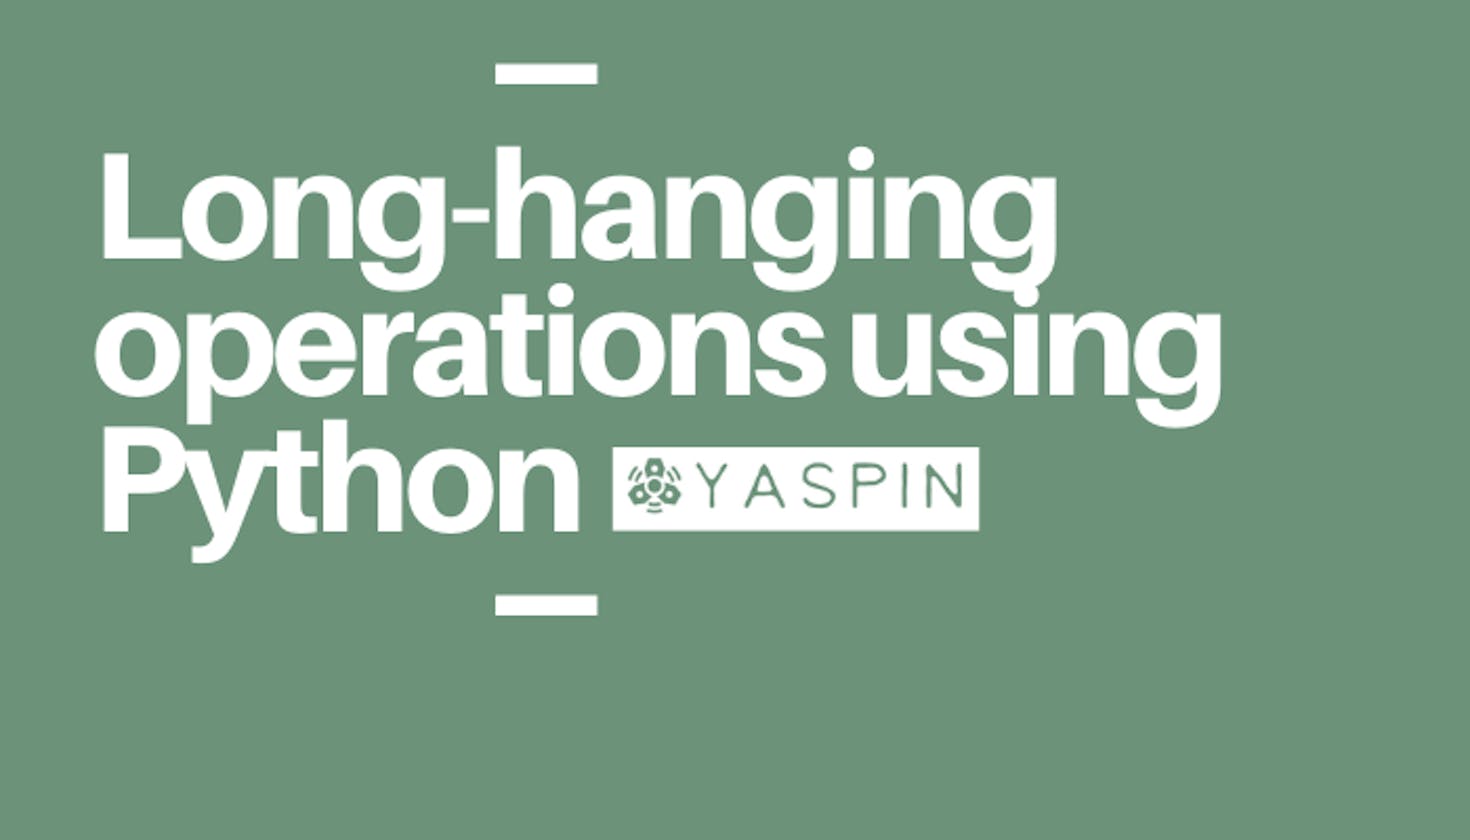 How to add progress for long-hanging operations using Python